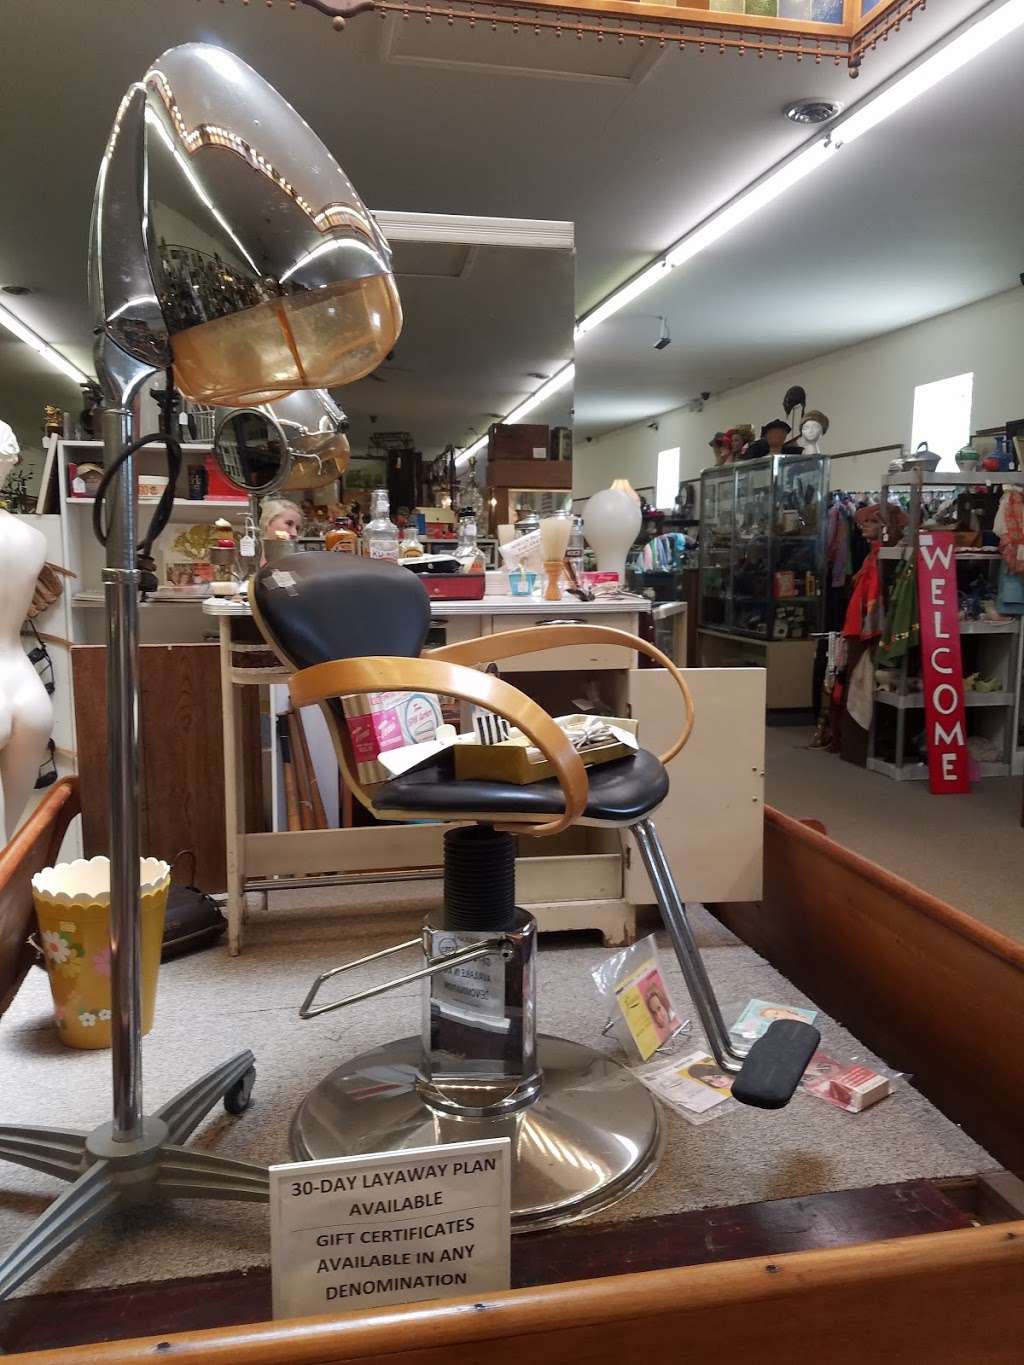 The Antique Market | 3707 N. E, Frontage Rd, Michigan City, IN 46360, USA | Phone: (219) 879-4084